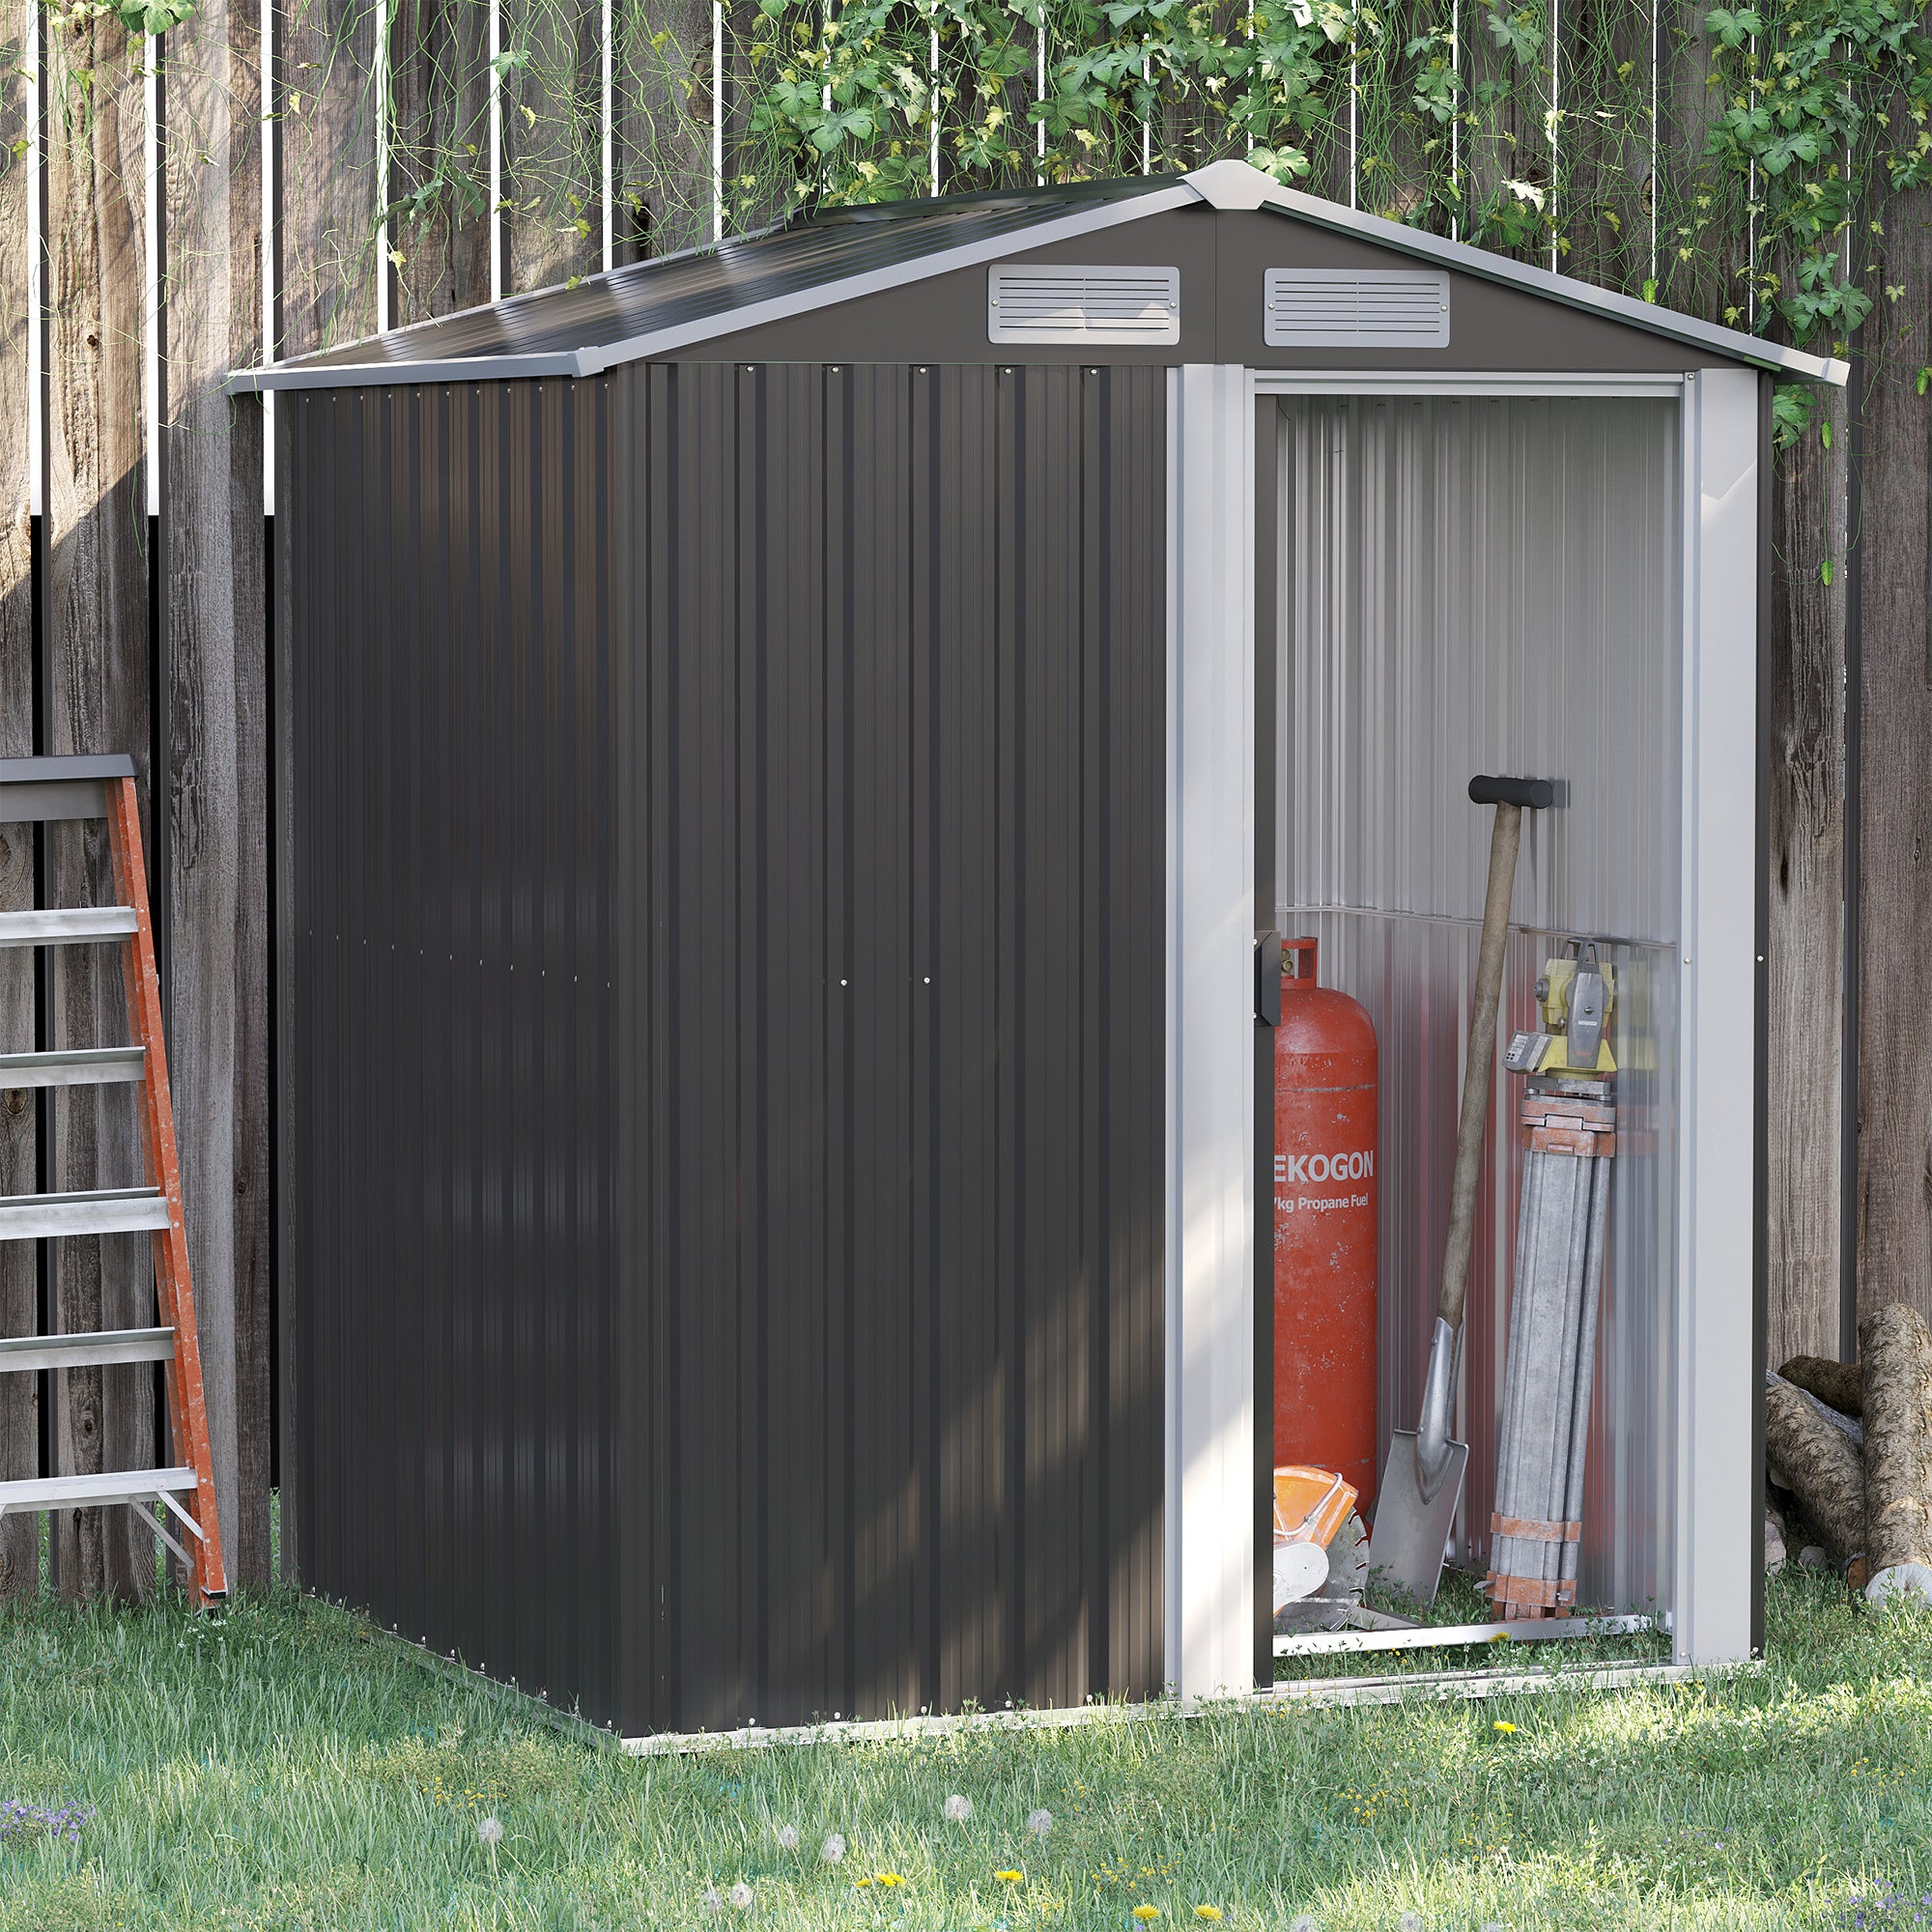 Outsunny 5ft x 4ft Garden Metal Storage Shed, Tool Storage Shed with Sliding Door, Sloped Roof and Floor Foundation for Garden, Backyard, Patio, Grey - Inspirely